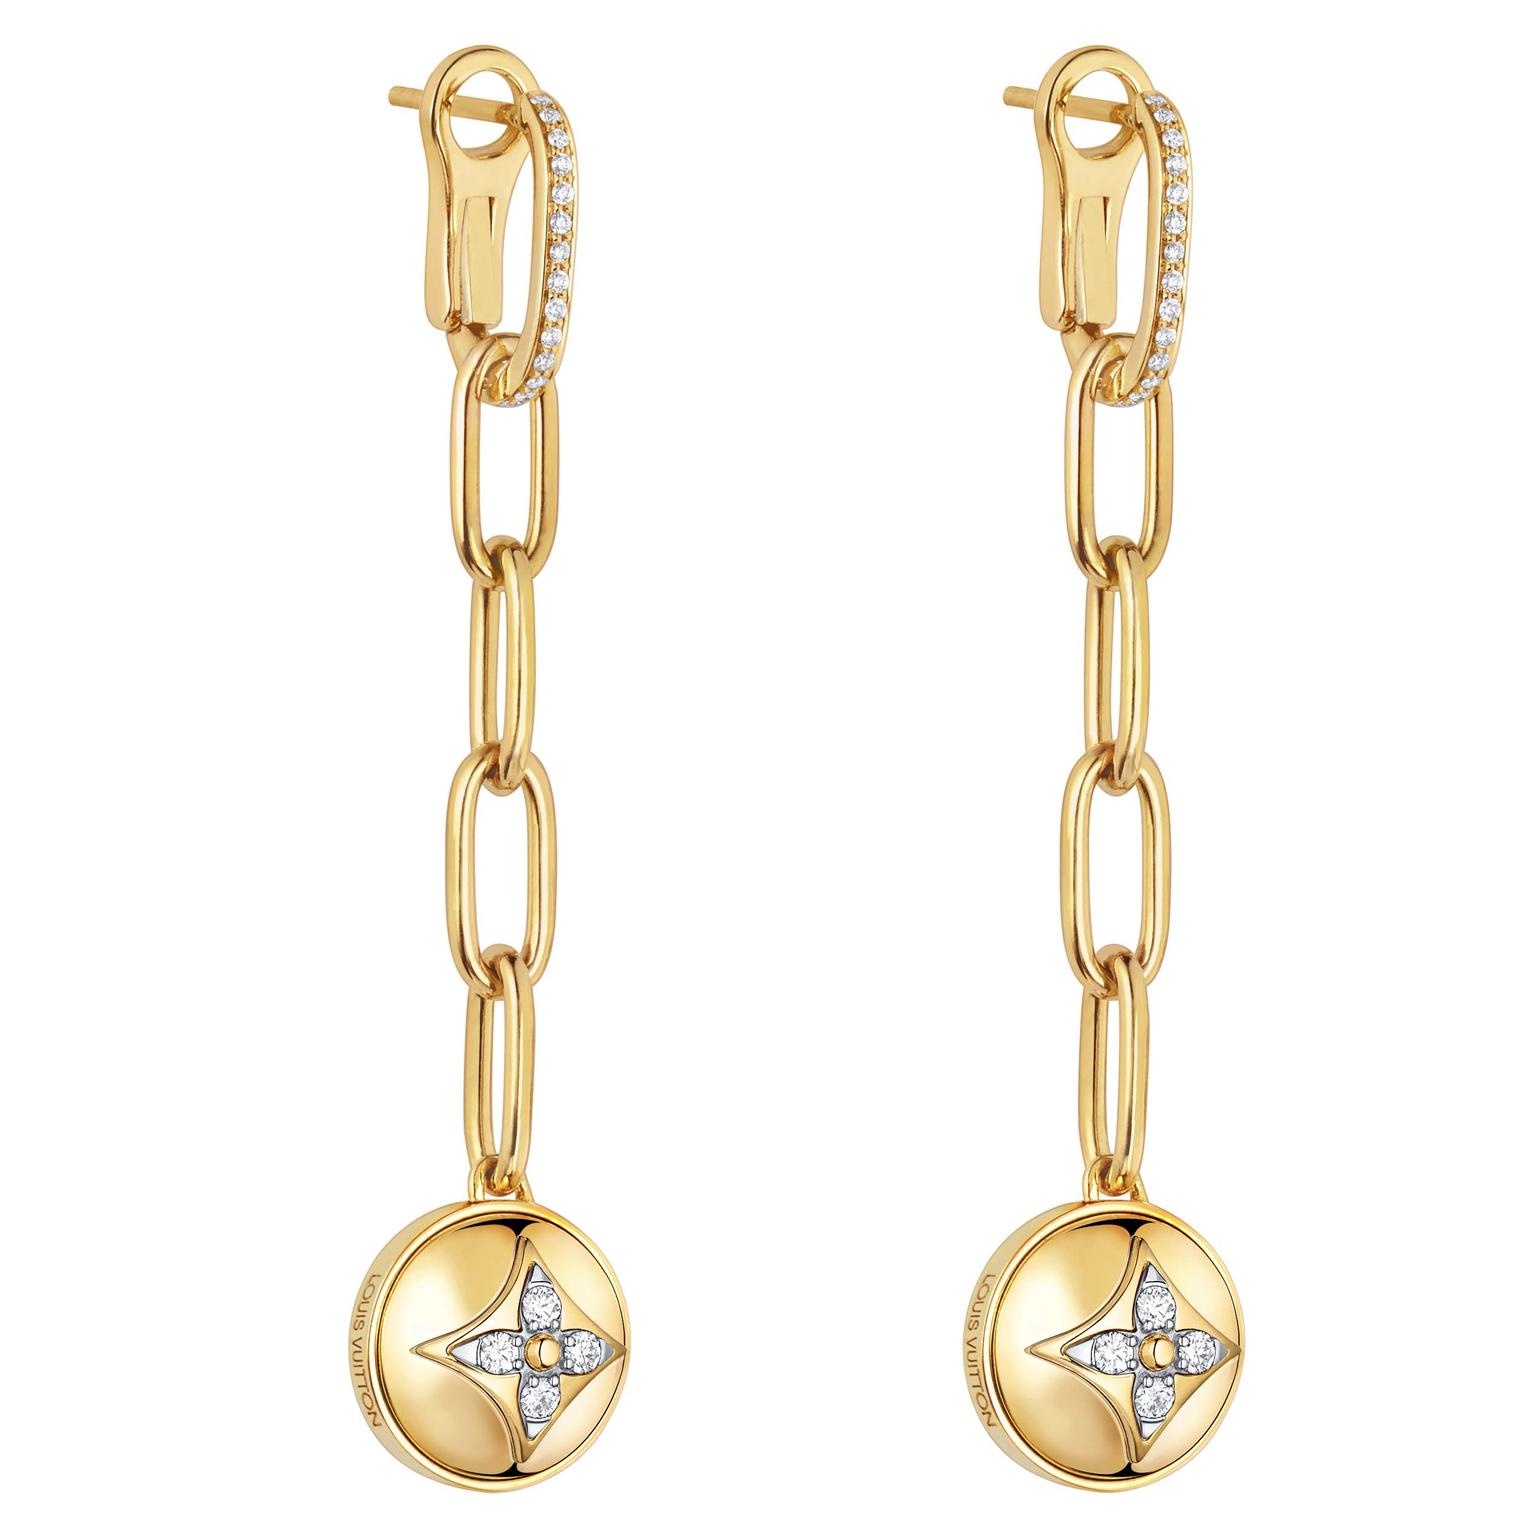 Louis Vuitton B.BLossom earrings in yellow gold | Louis Vuitton | The Jewellery Editor